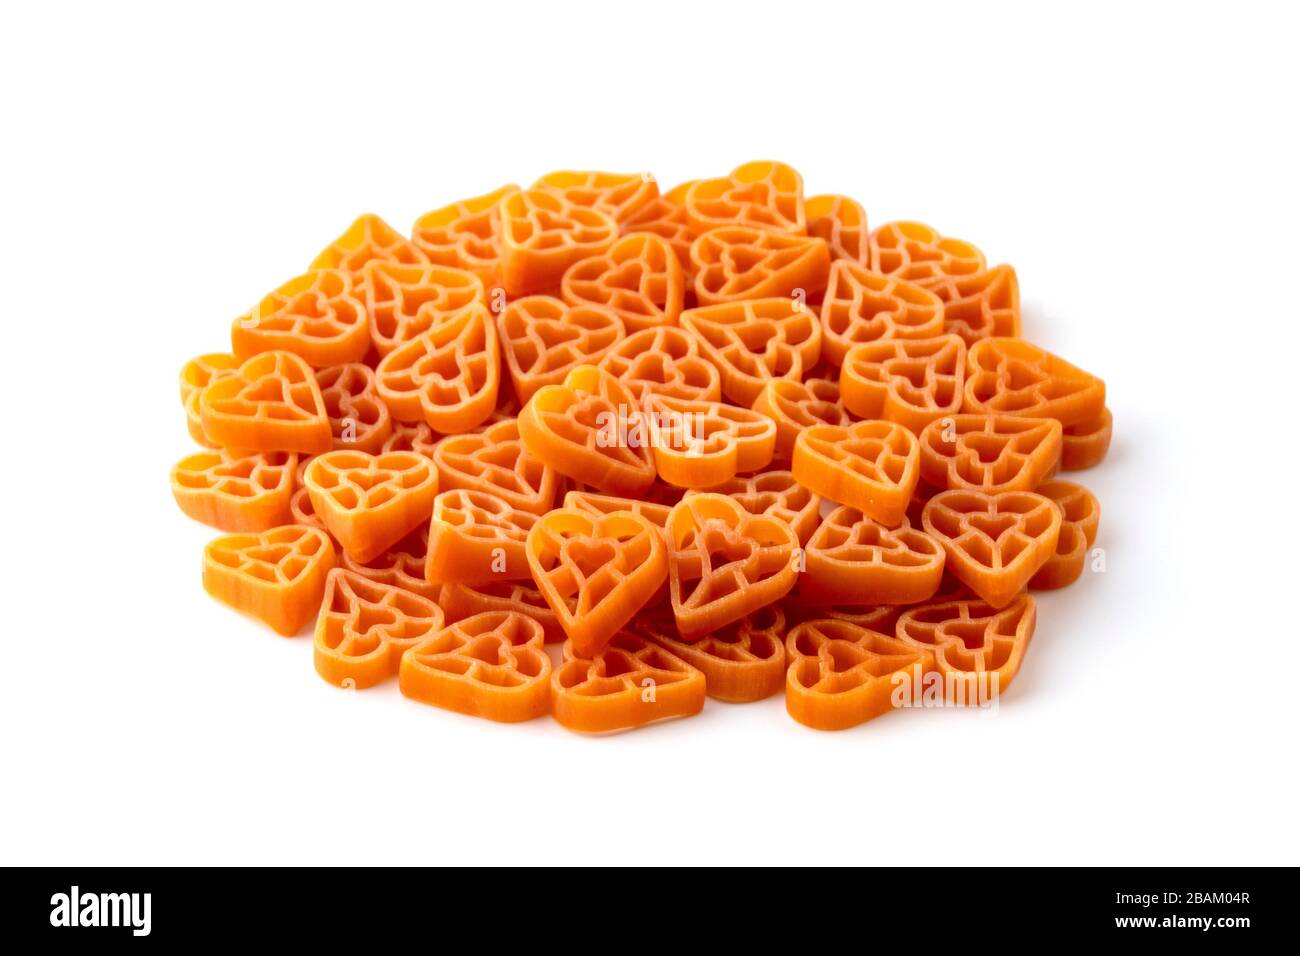 Heart shaped pasta on a white background Stock Photo